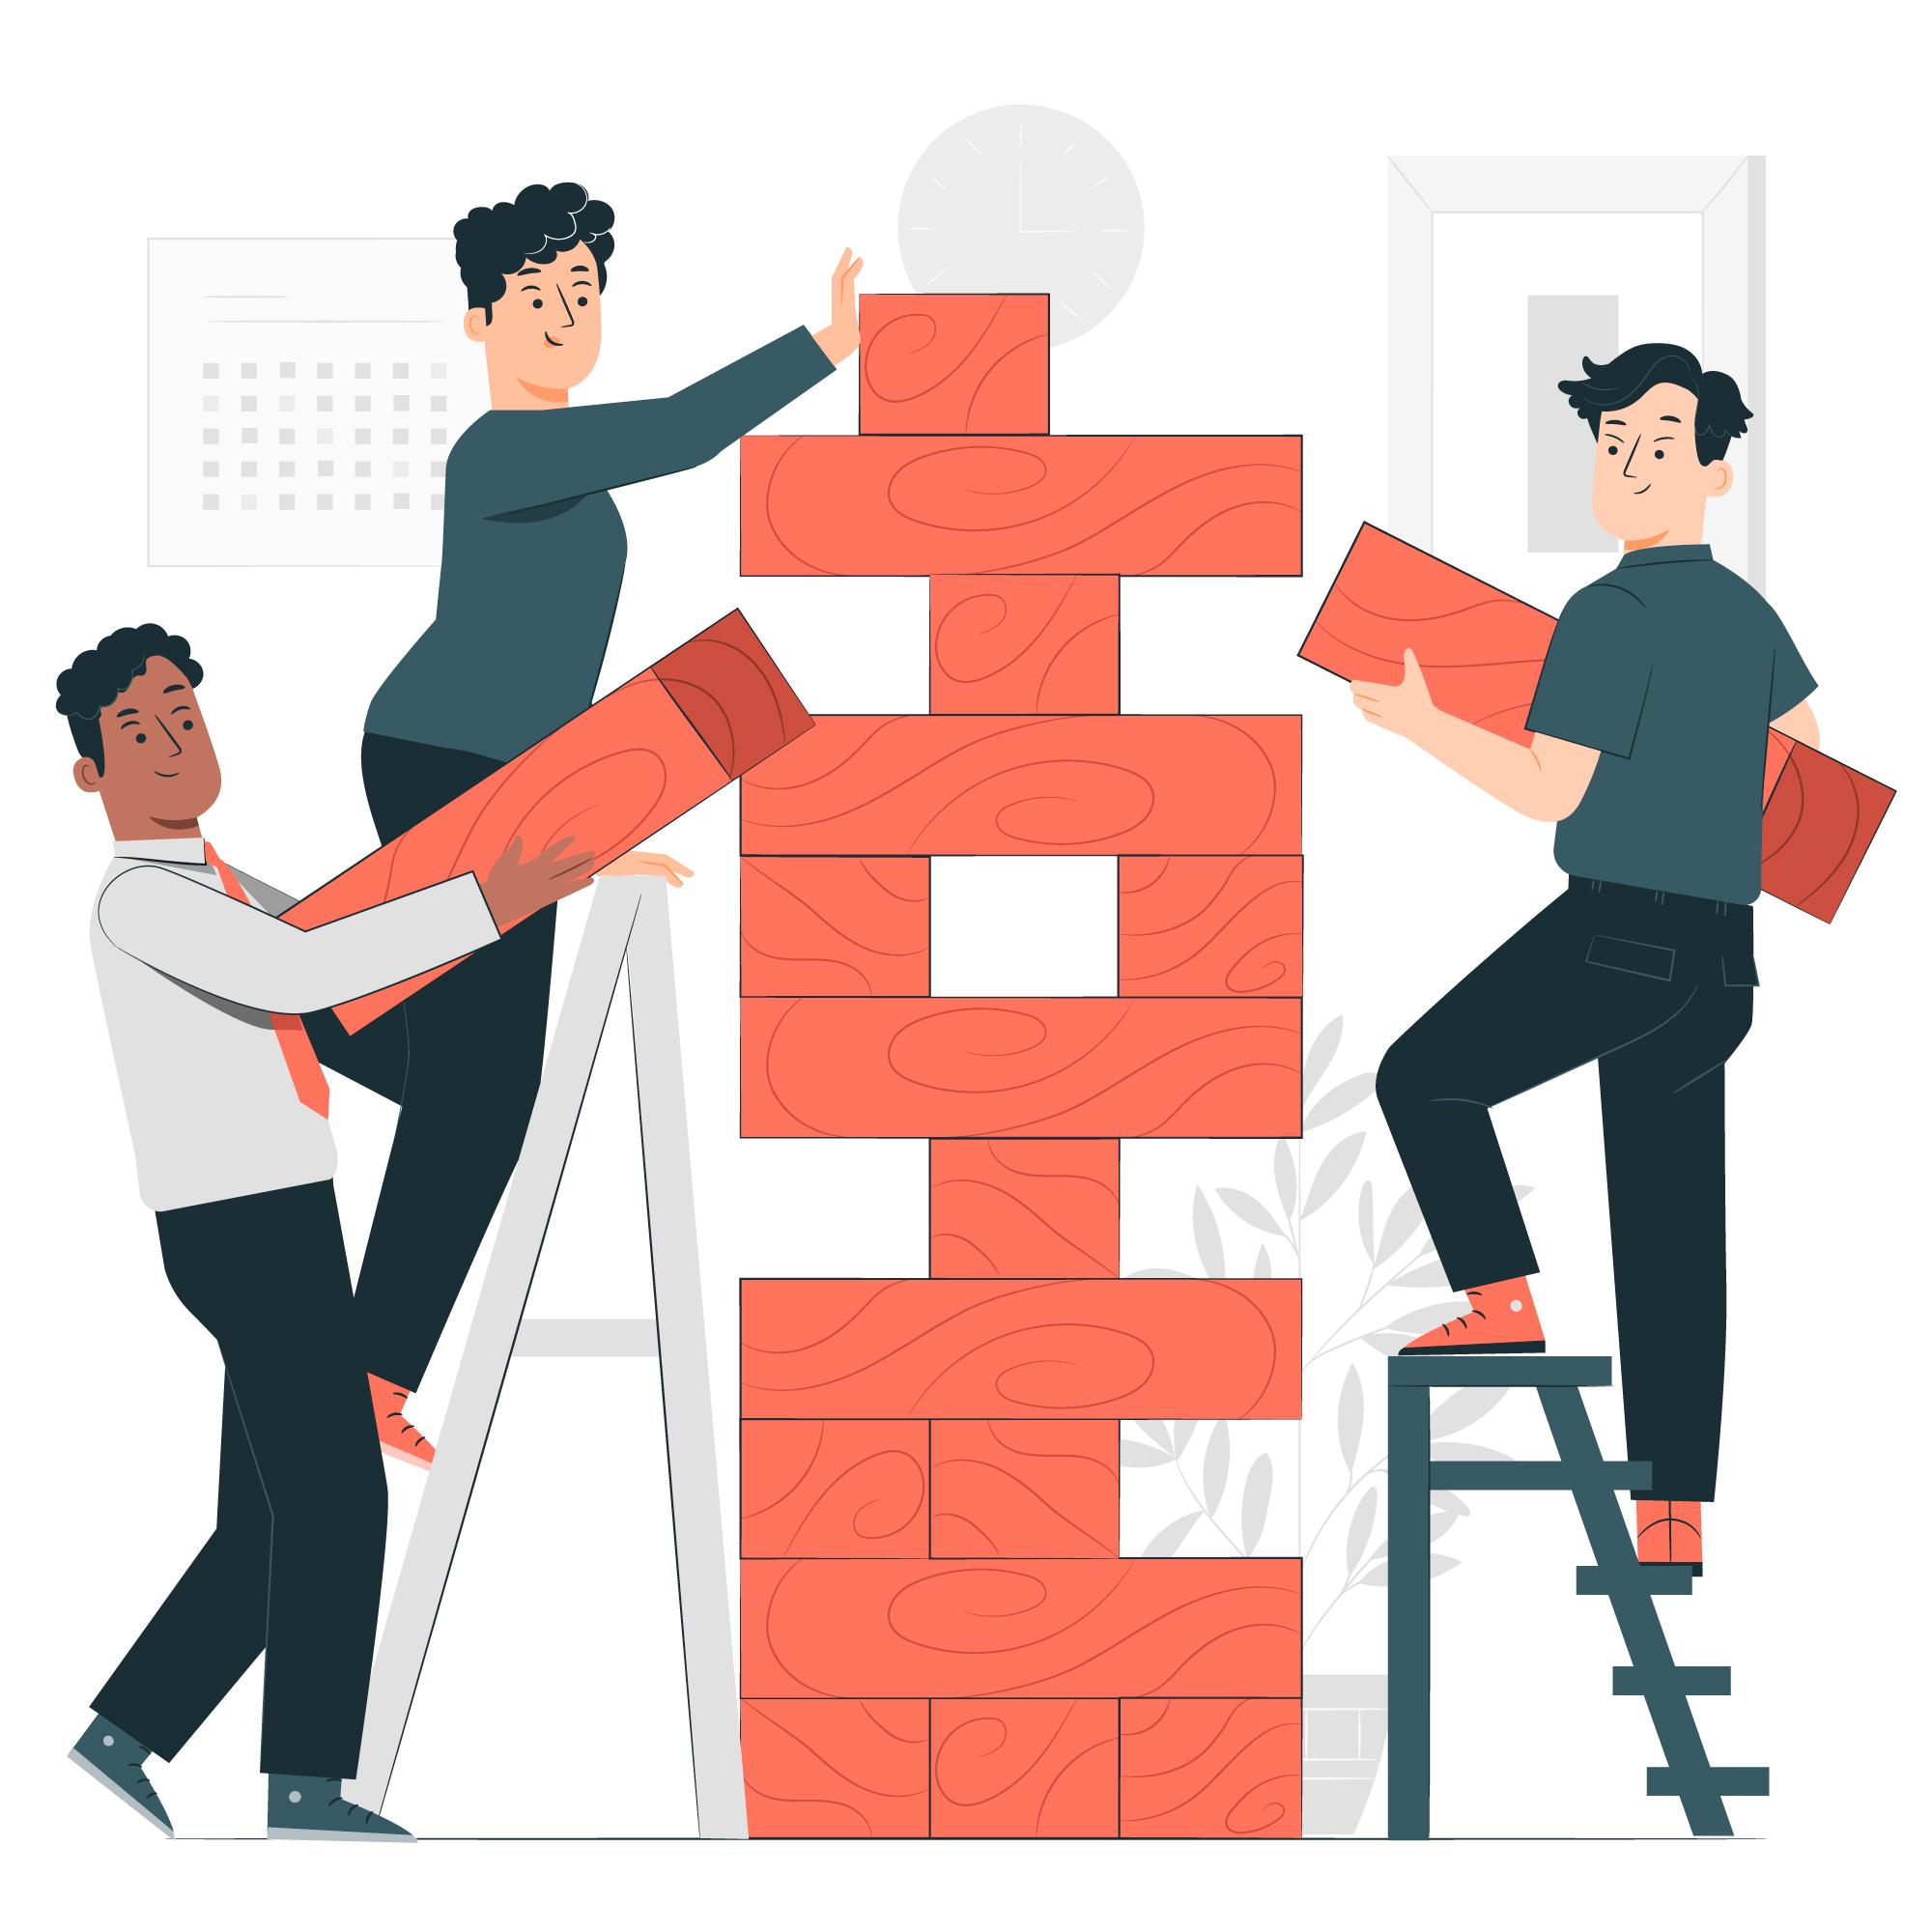 Three people building a structure together